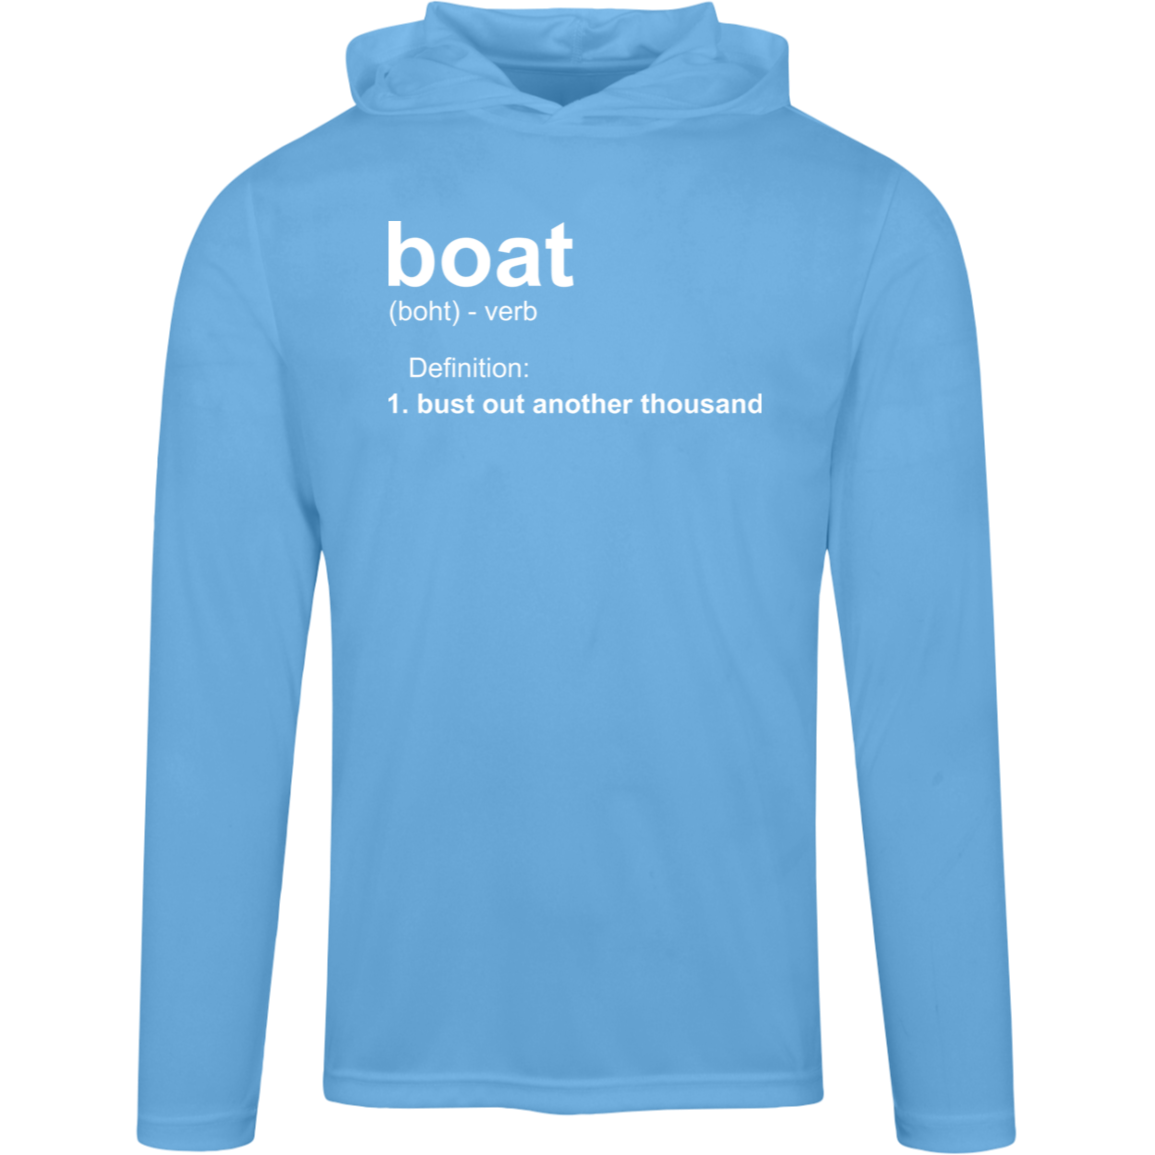 ***2 SIDED***  HRCL FL - Boat.... Bust Out Another Thousand - TT41 Team 365 Mens Zone Hooded Tee